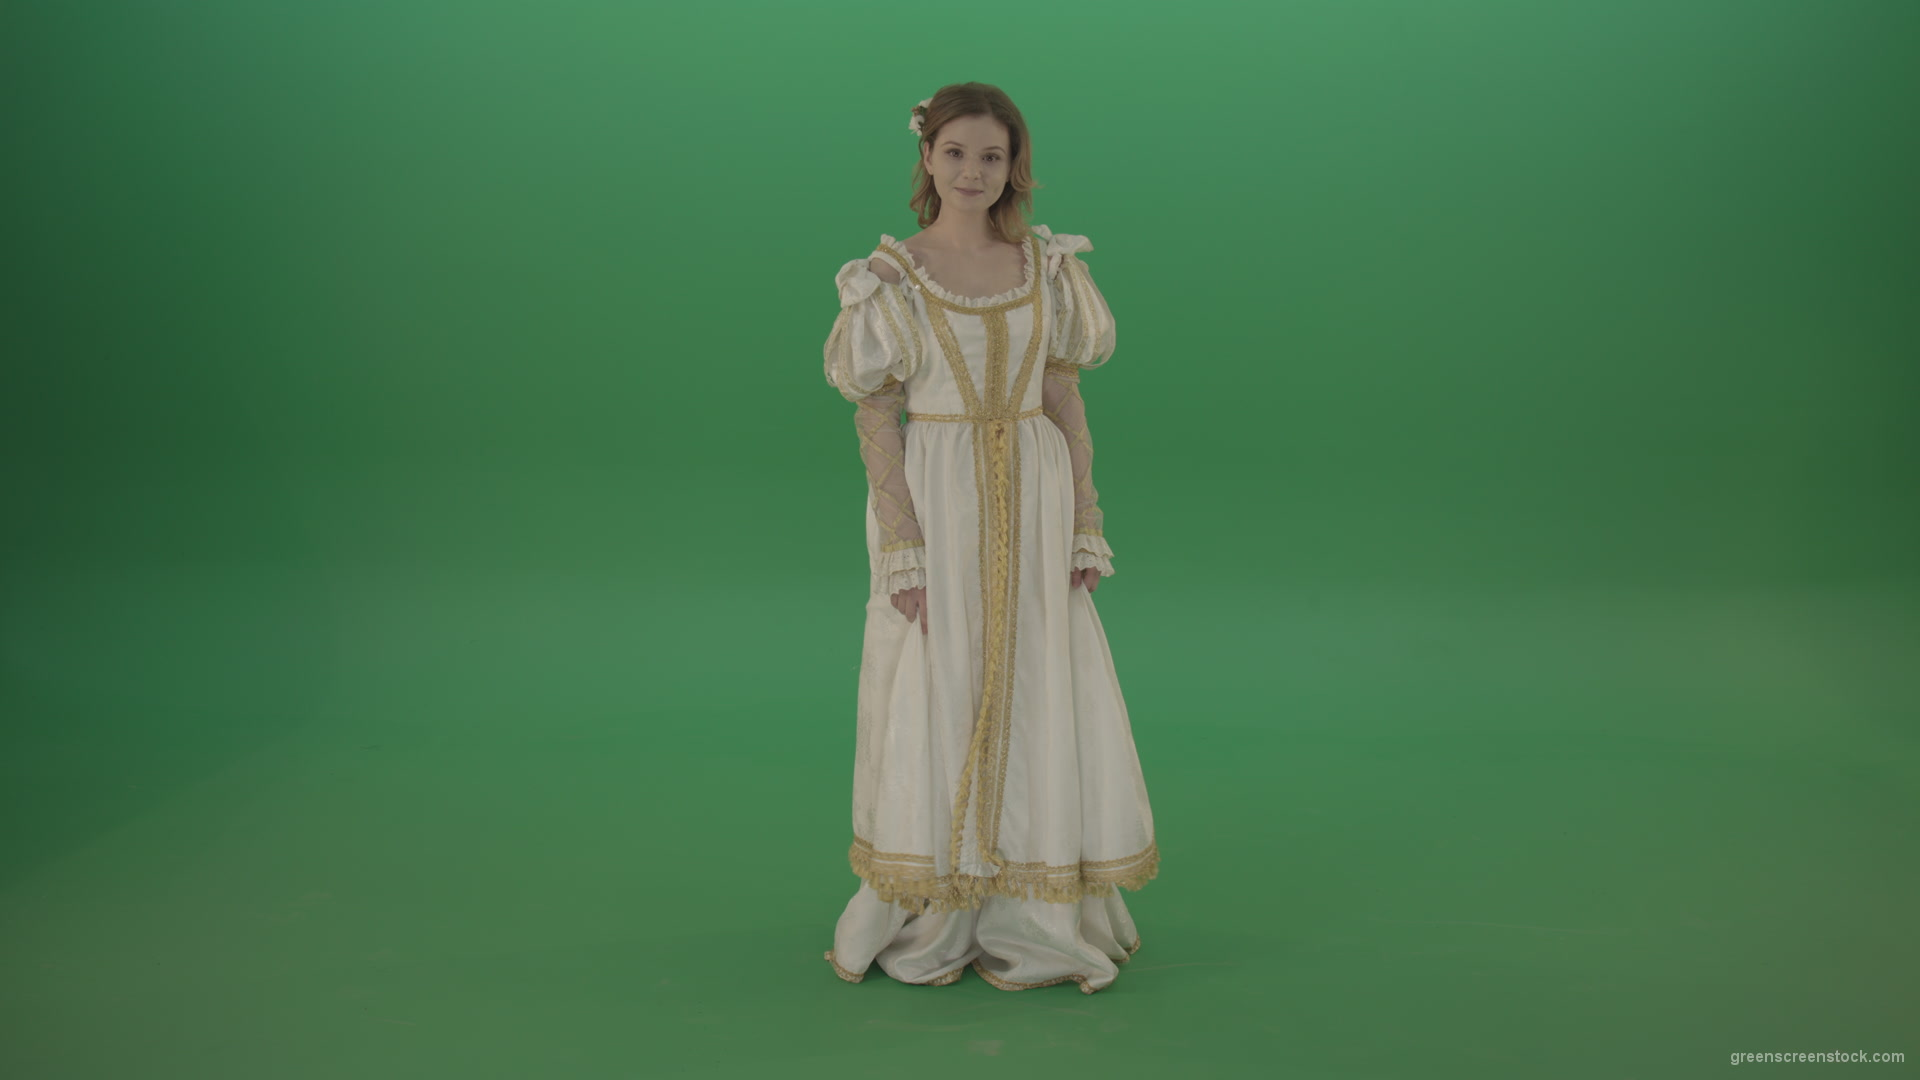 Easy-bowed-girl-is-happy-to-meet-isolated-on-green-screen_009 Green Screen Stock